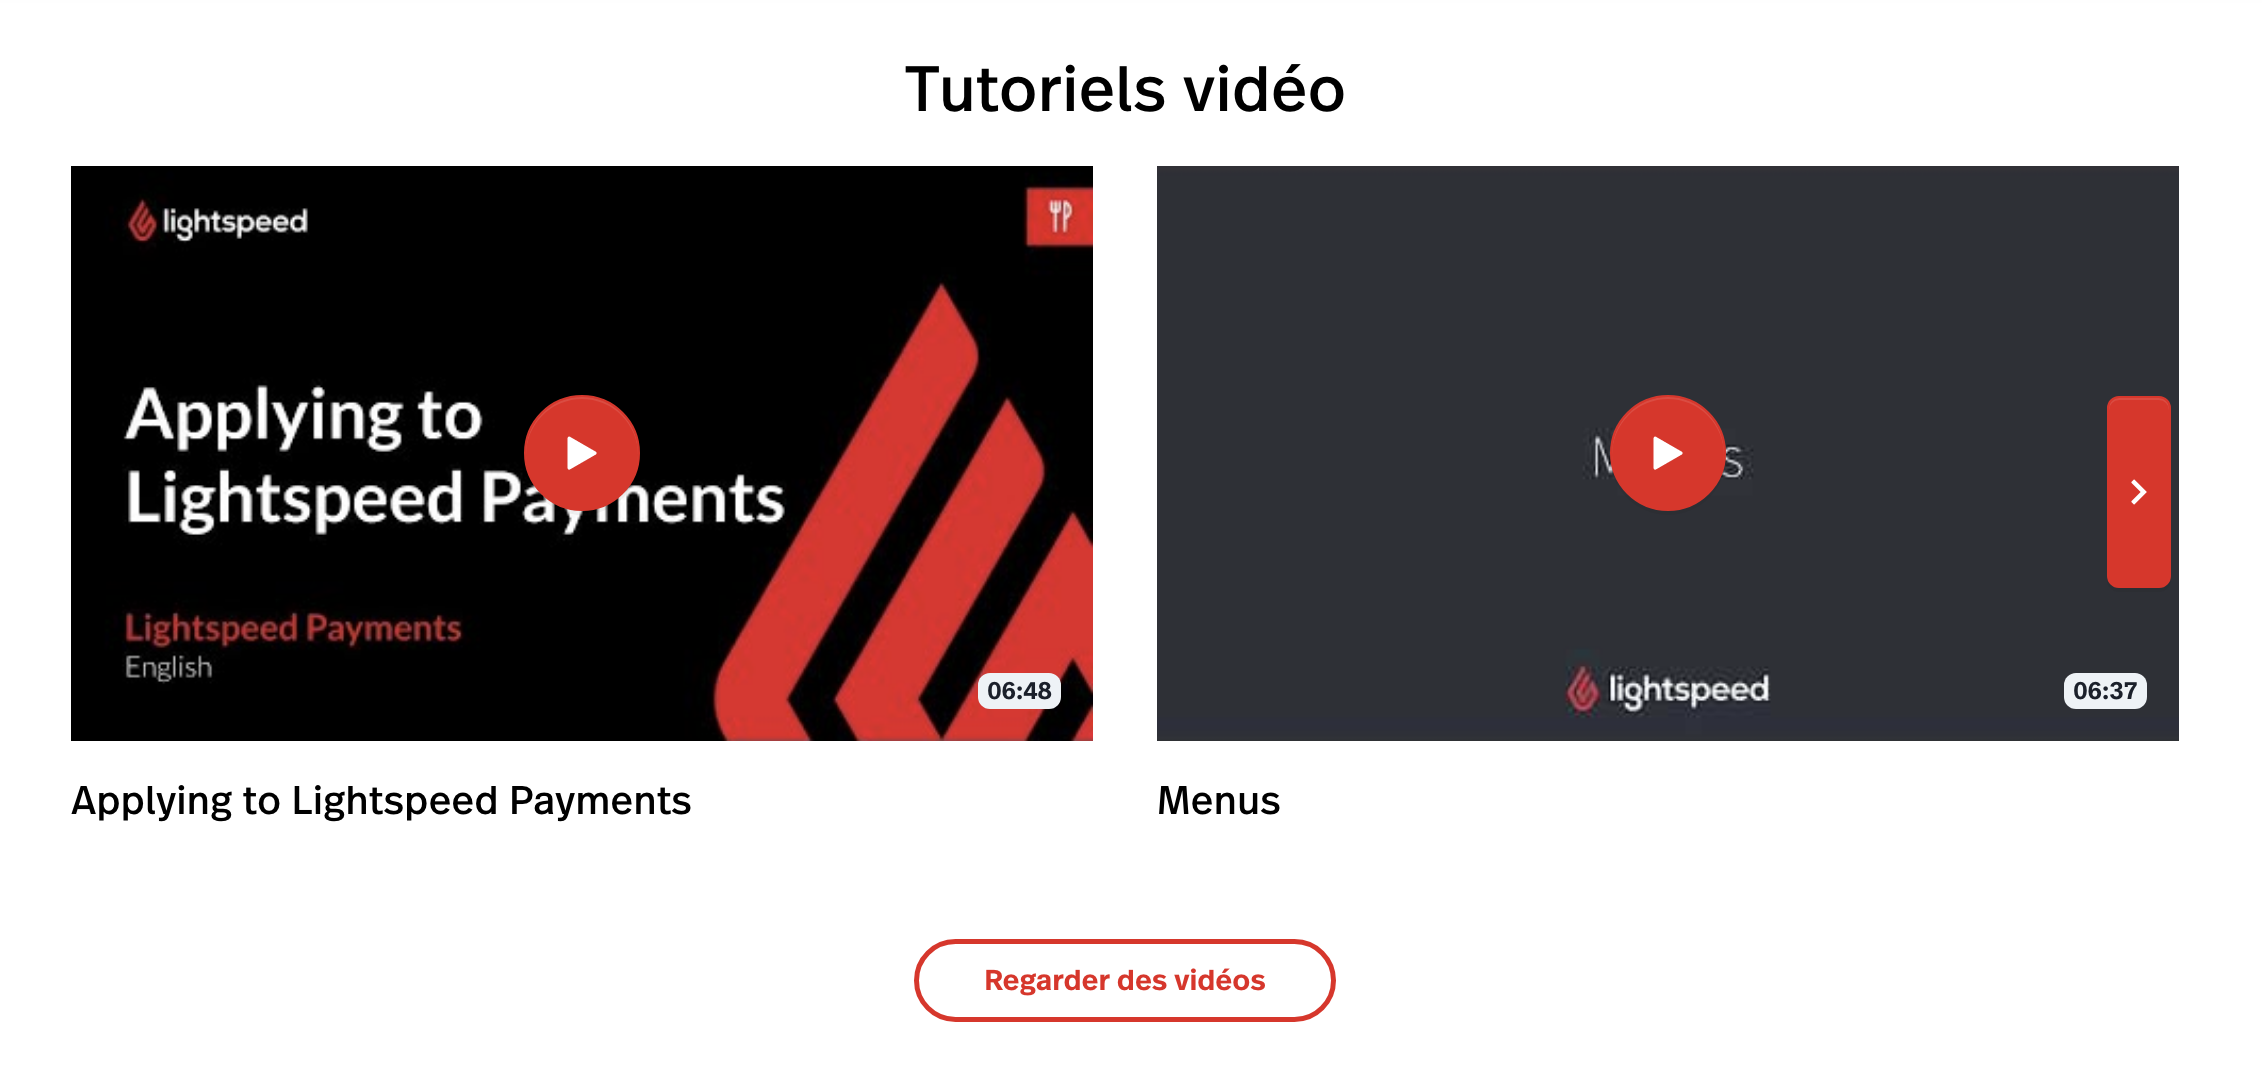 L-Series-Video-Carousel-French.png